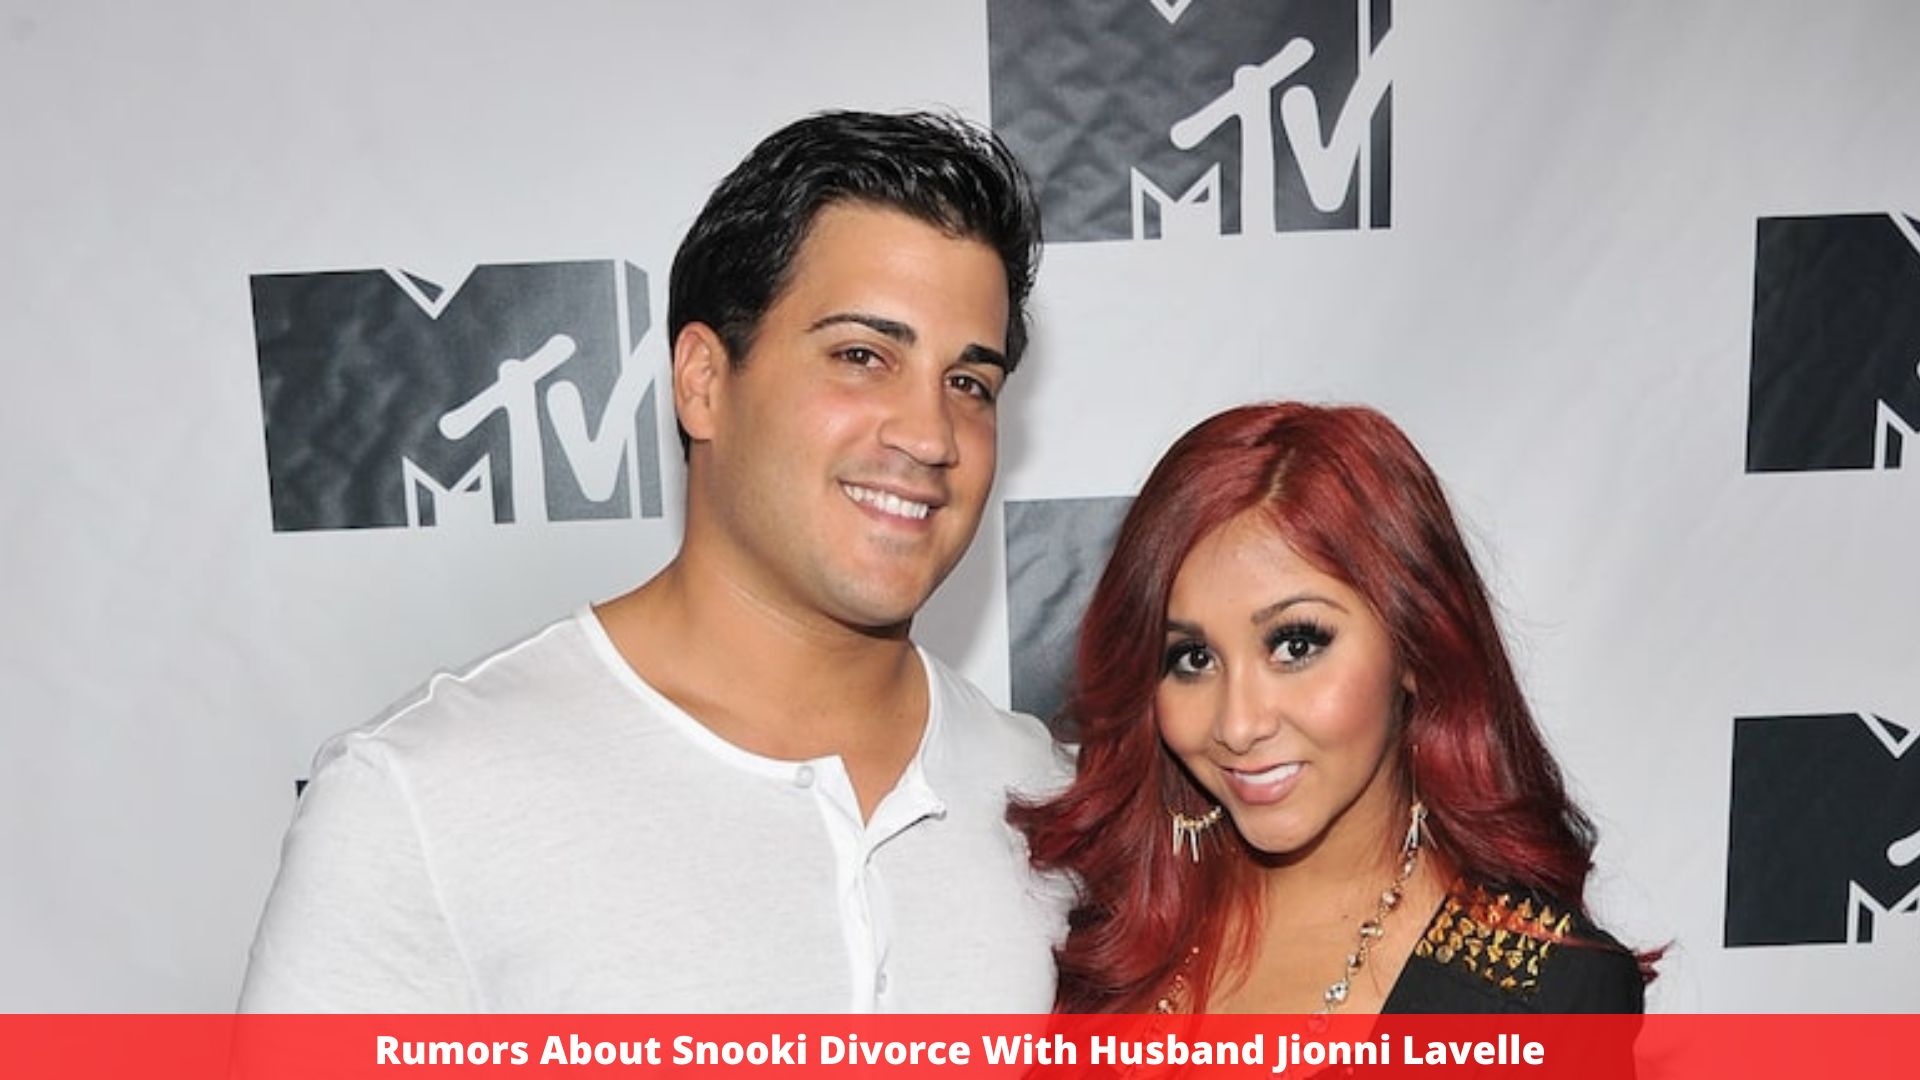 Rumors About Snooki Divorce With Husband Jionni Lavelle